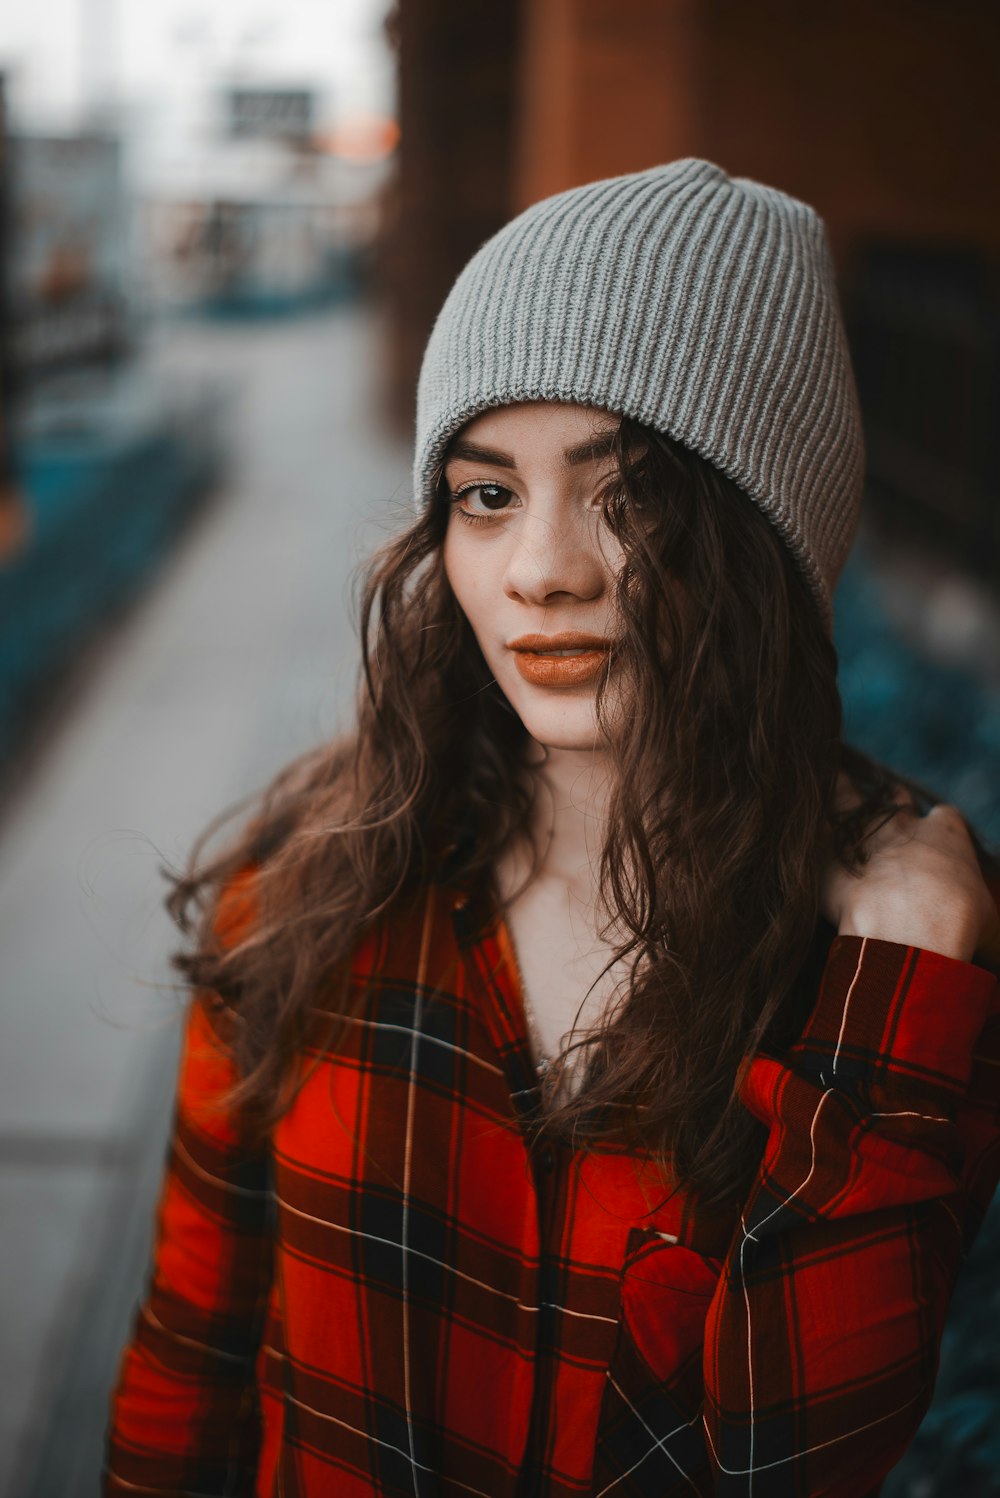 woman in red and black plaid jacket wearing gray knit cap